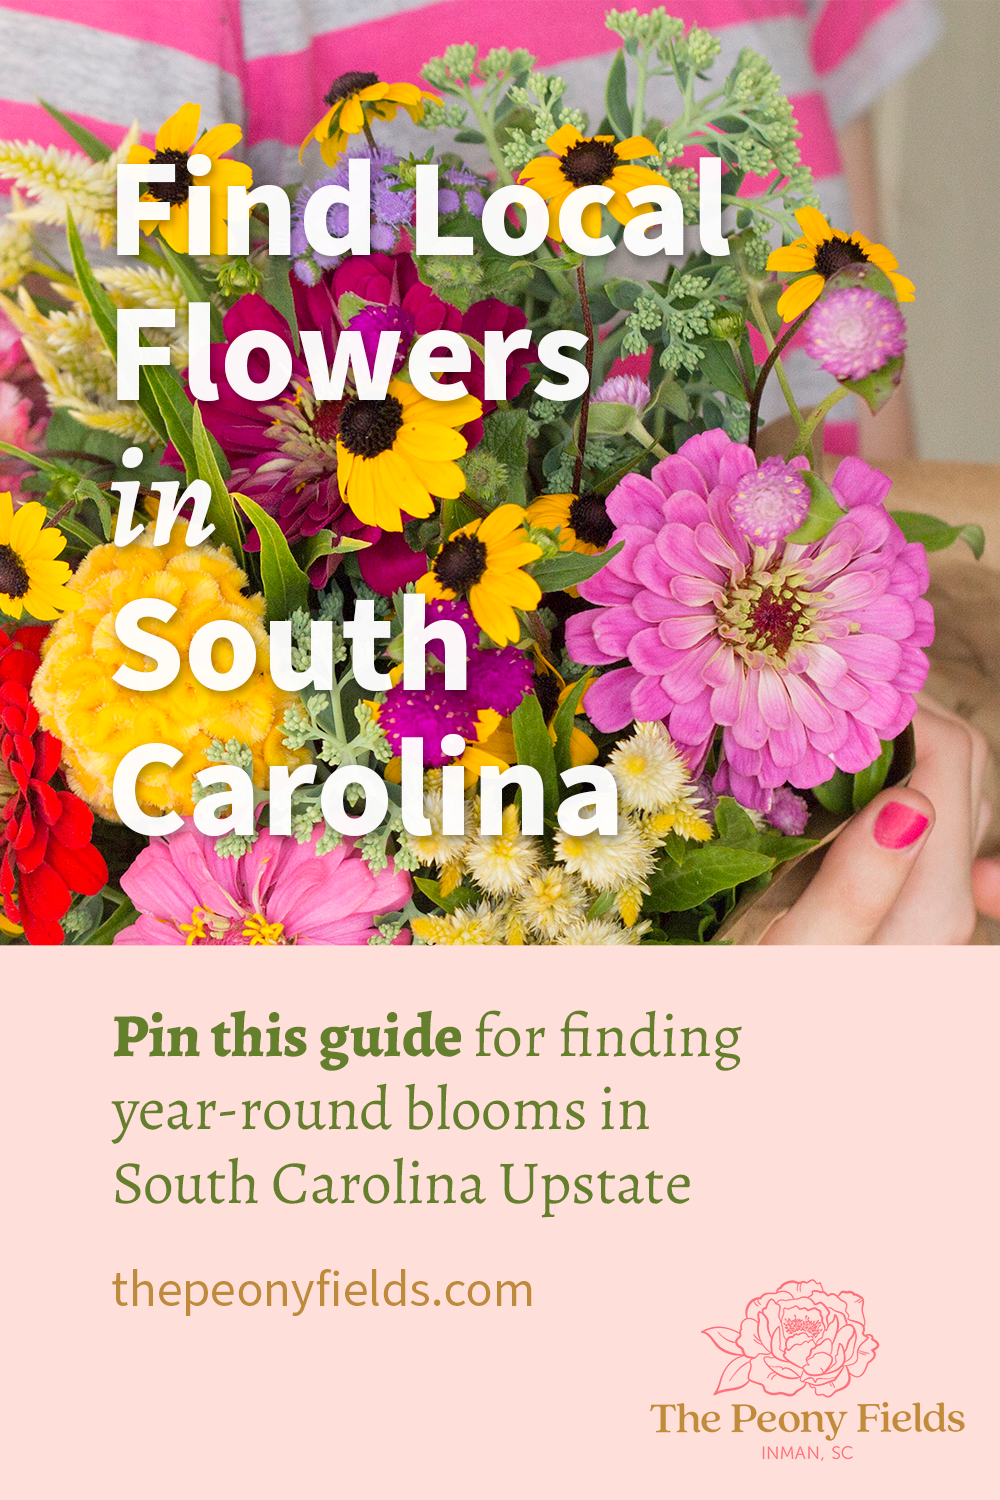 Find Local Flowers Throughout The Year in the South Carolina Upstate.